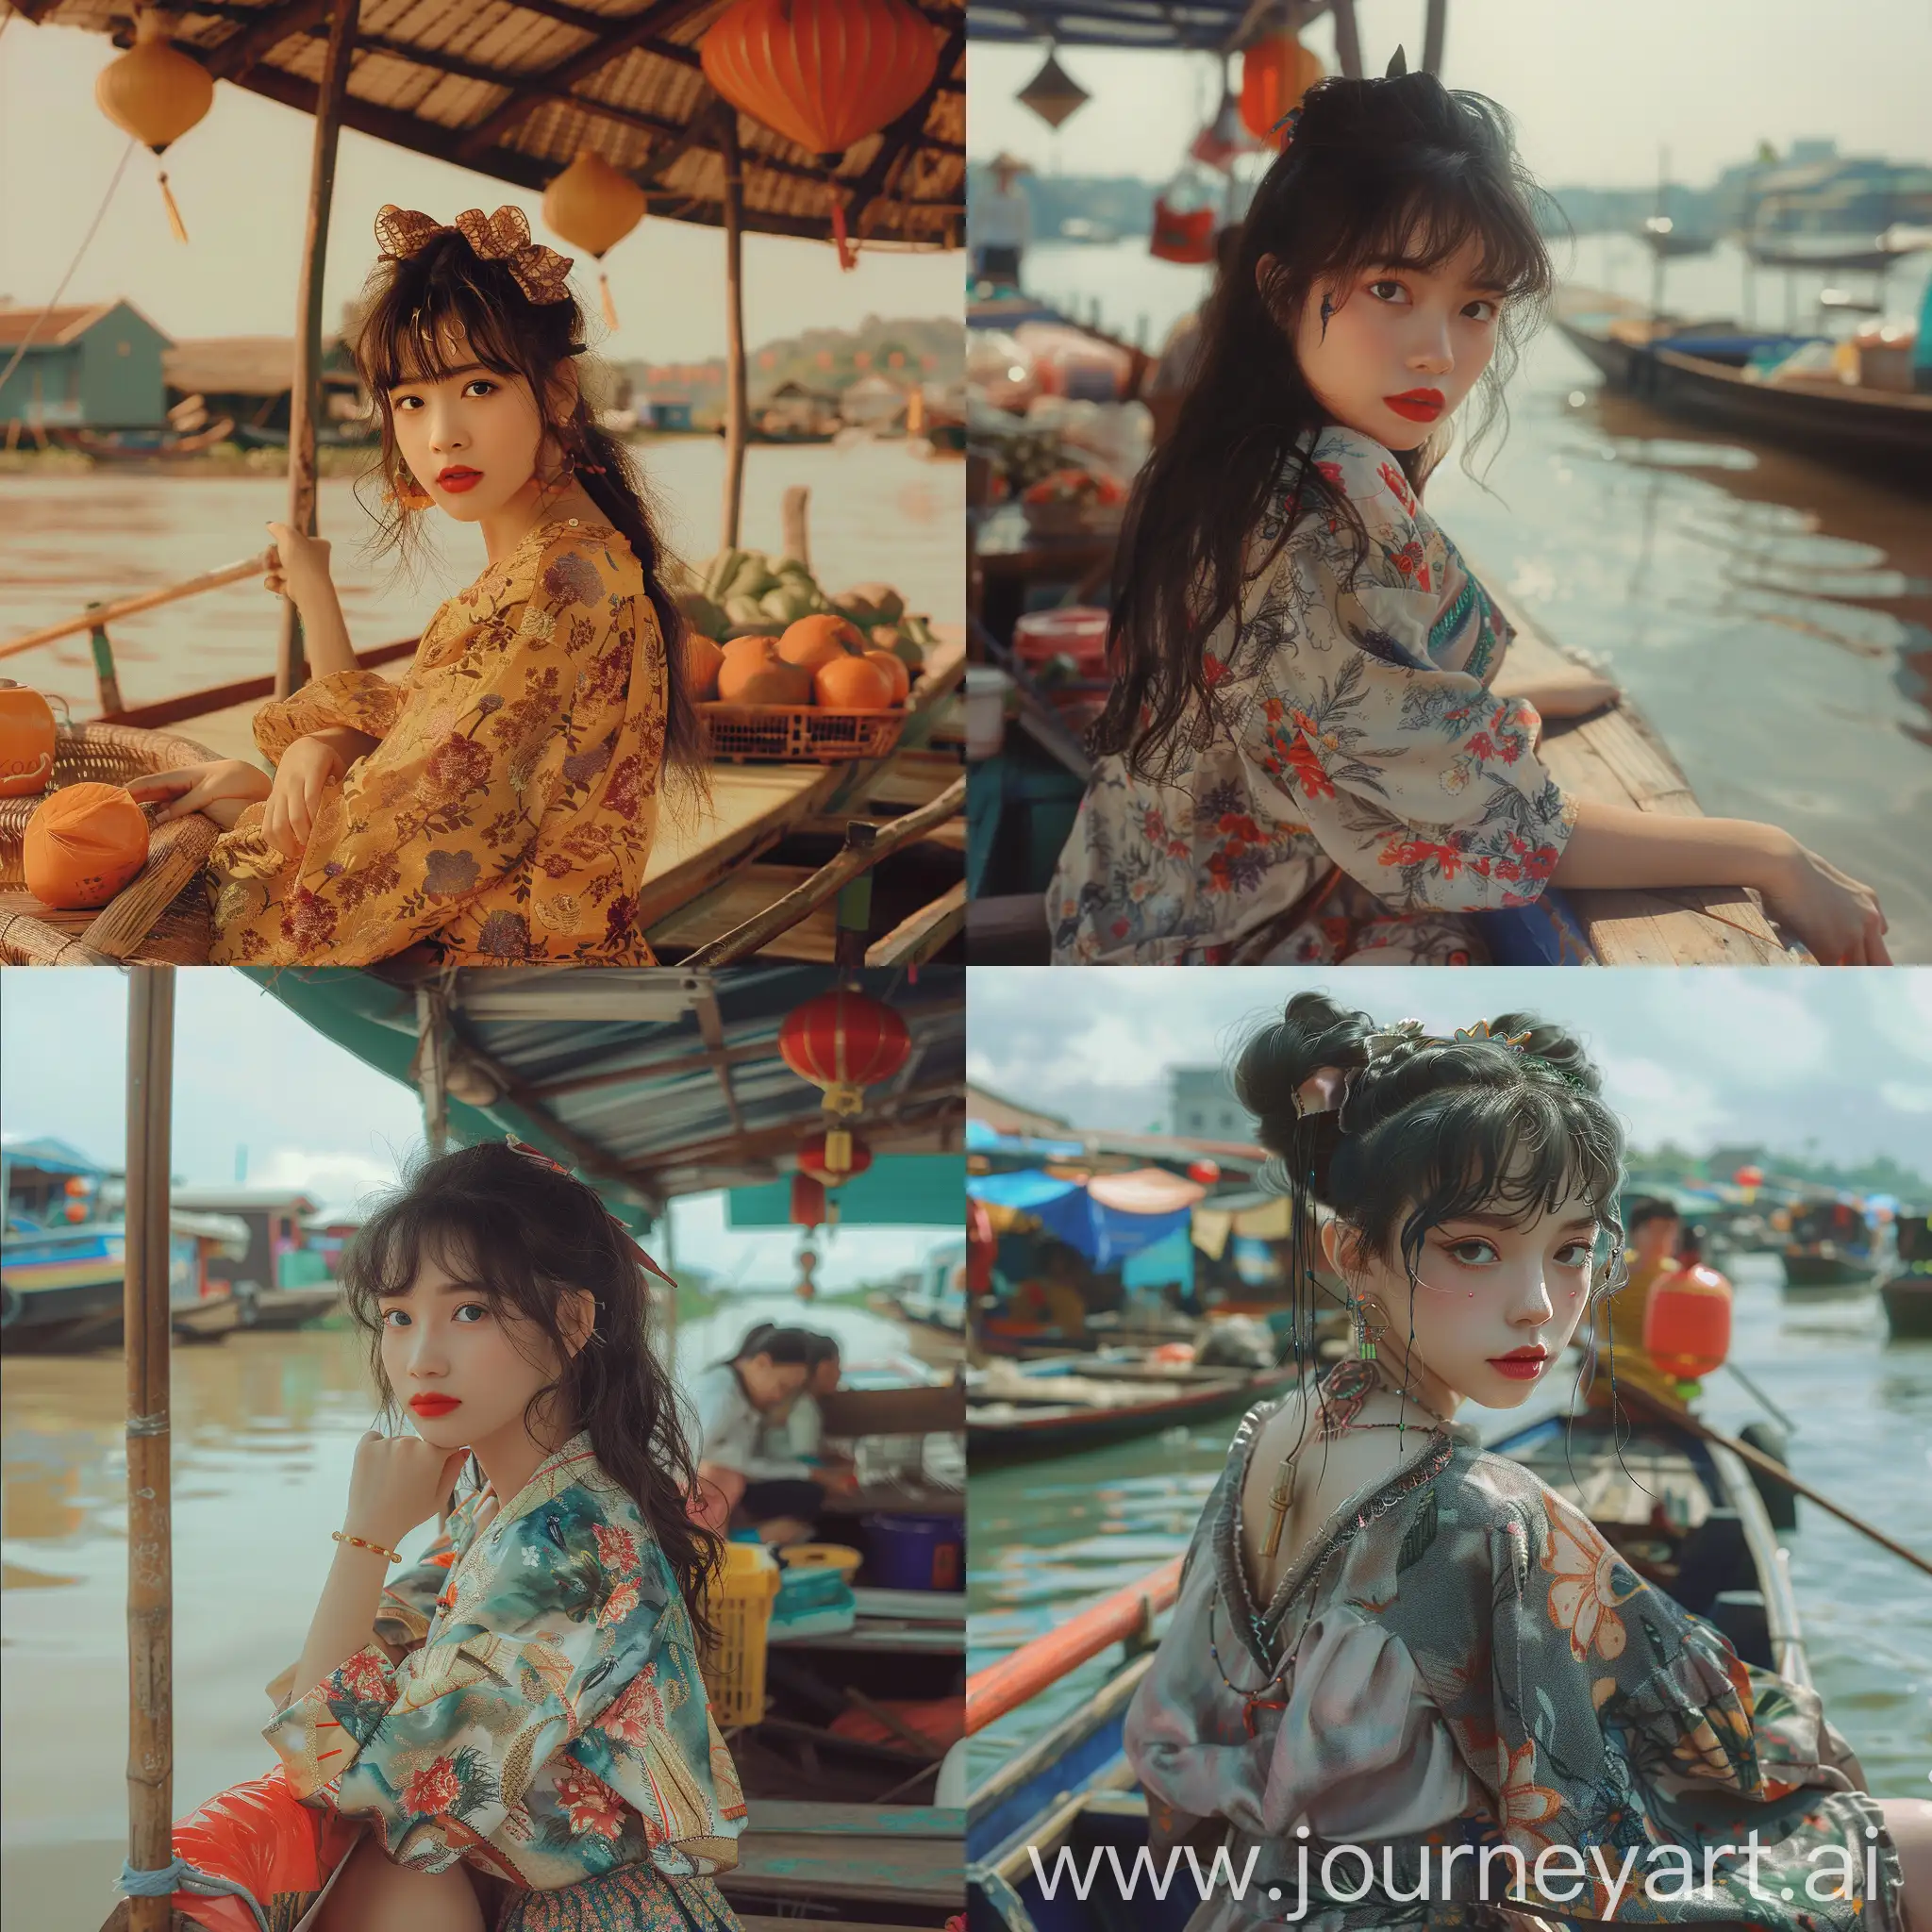 “Create a girl with the Asian style of the 90s on a boat at the Cai Rang floating market, the background is the scene of an early morning market session on the river.”